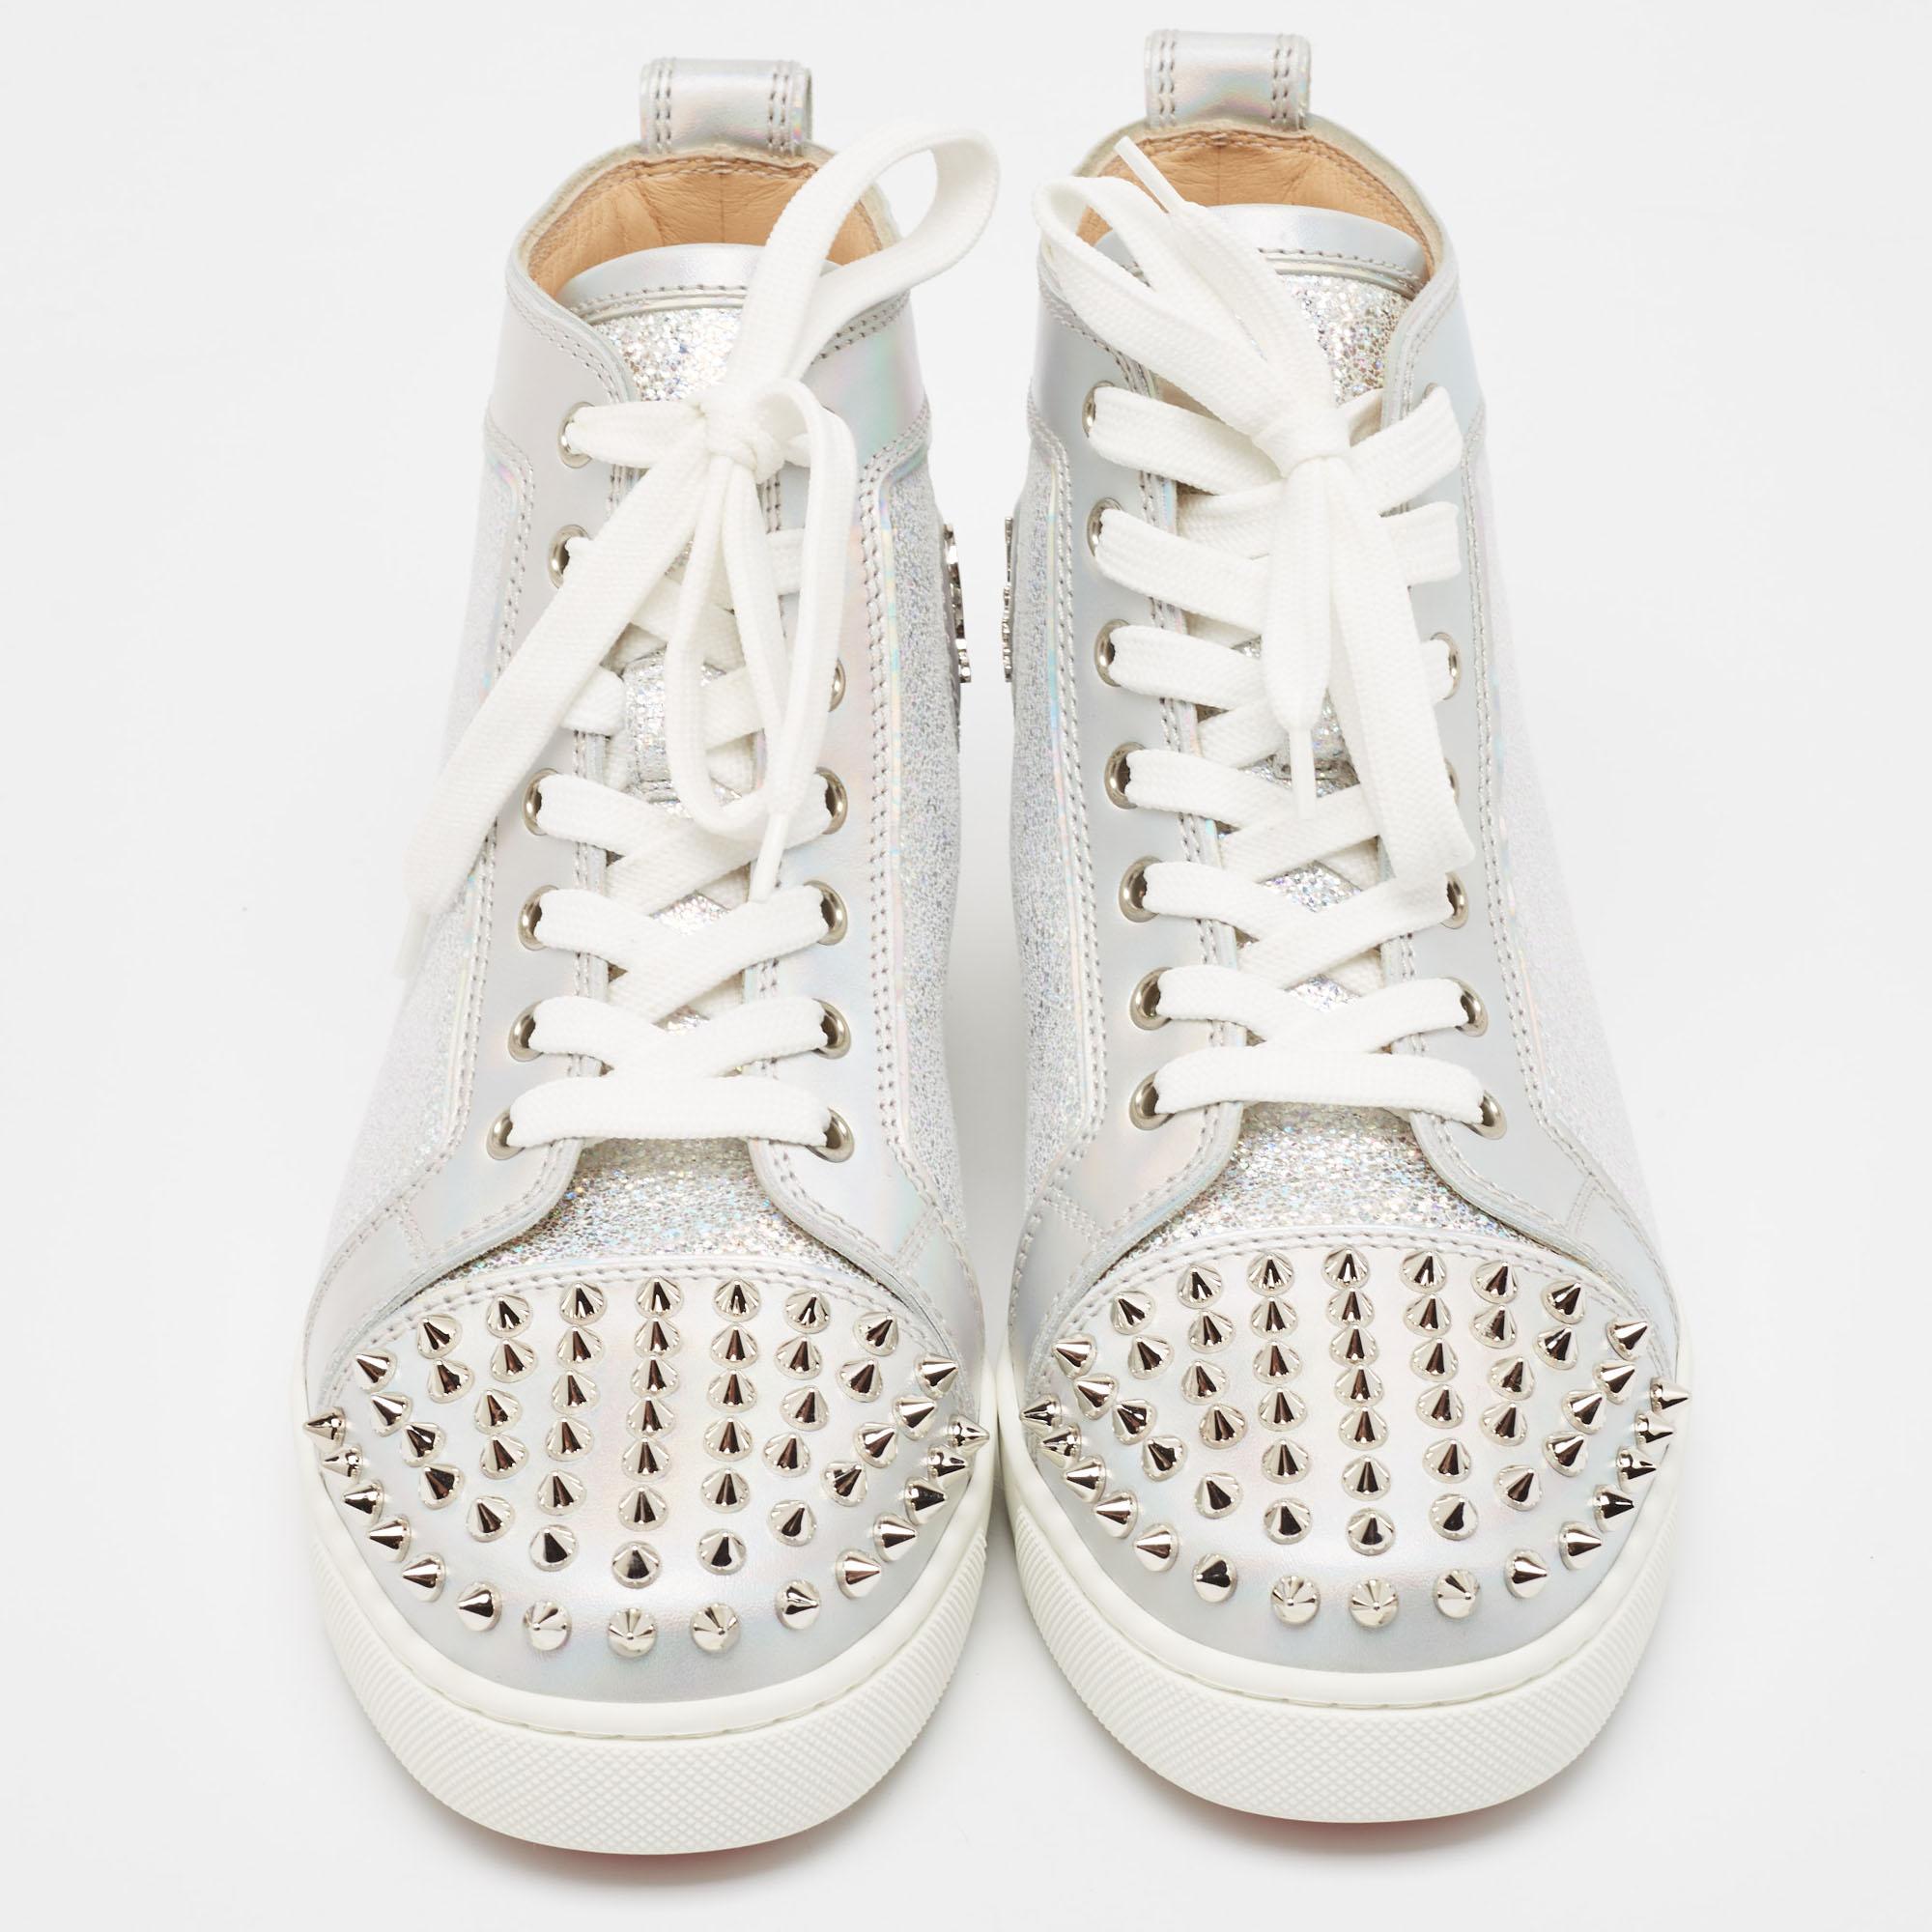 Women's Christian Louboutin Leather and Glitter Suede Lou Spikes Sneakers Size 39 For Sale